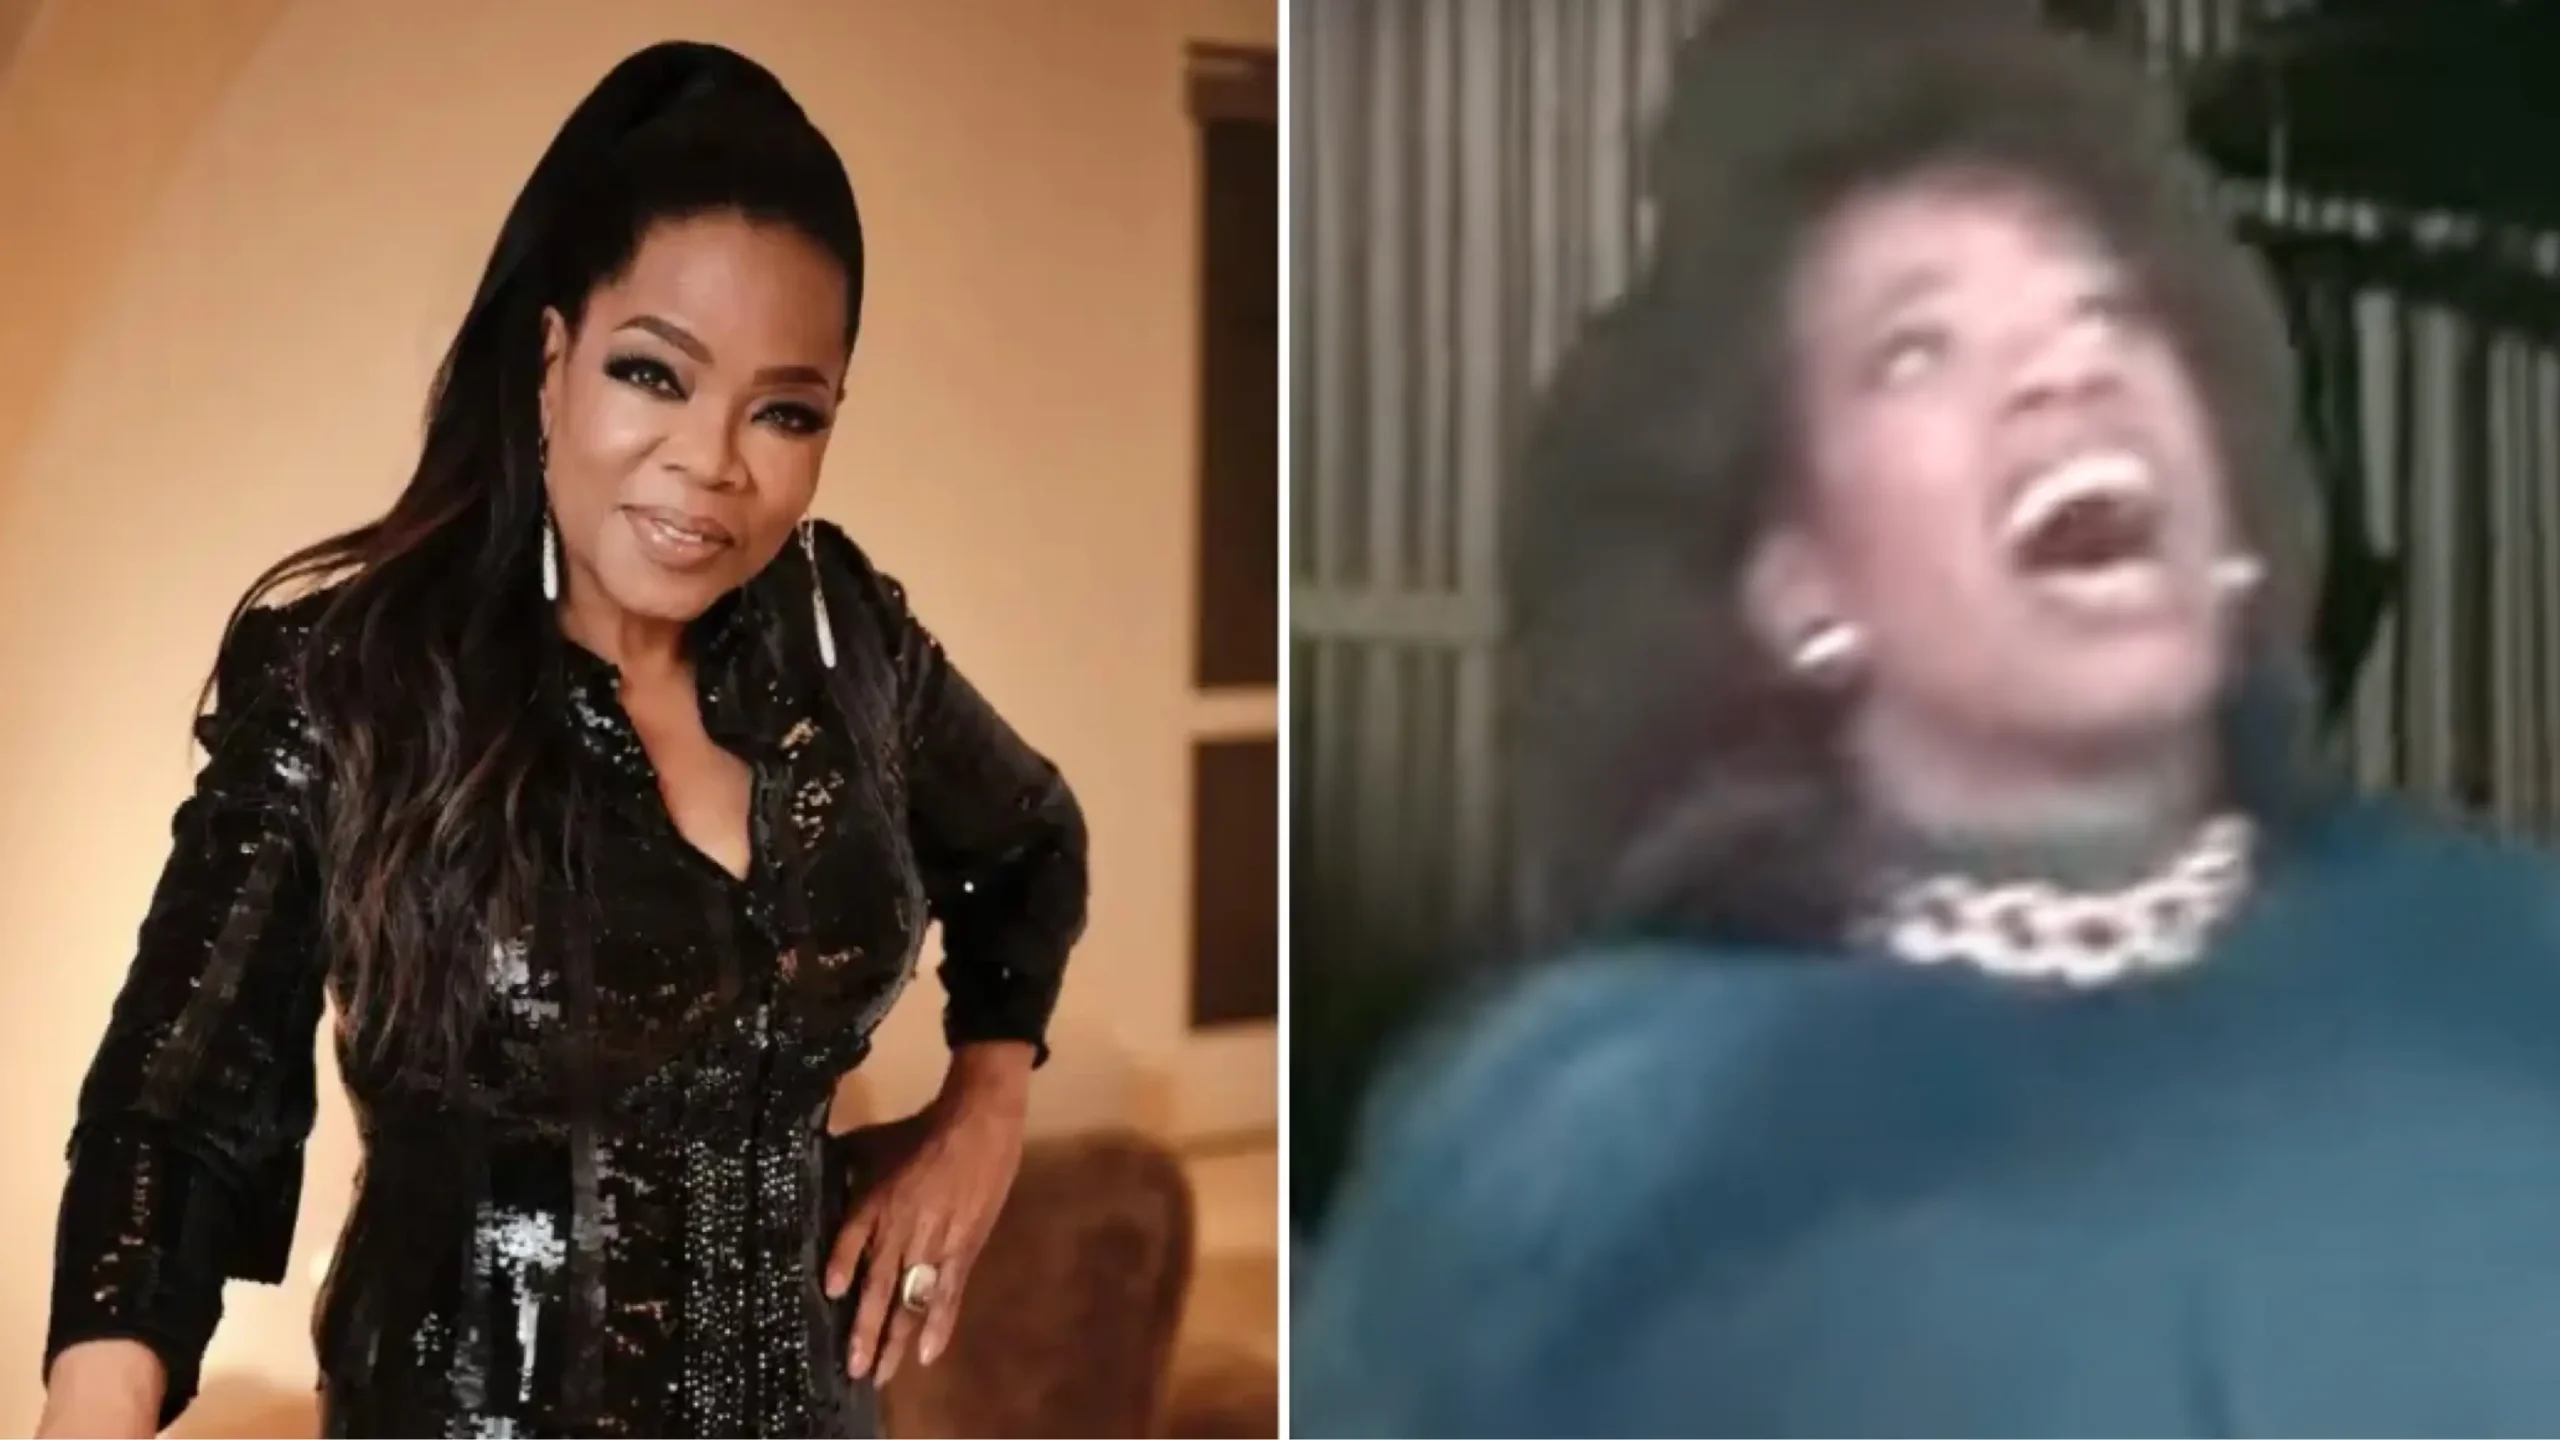 Oprah Winfrey (left) says Kim Wayans’ 1988 “In Living Color” skit of her eating until she bursts (right) was the “most hurtful” ridicule the former talk show host faced during that era. (Photos: @oprah/Instagram, In Living Color)